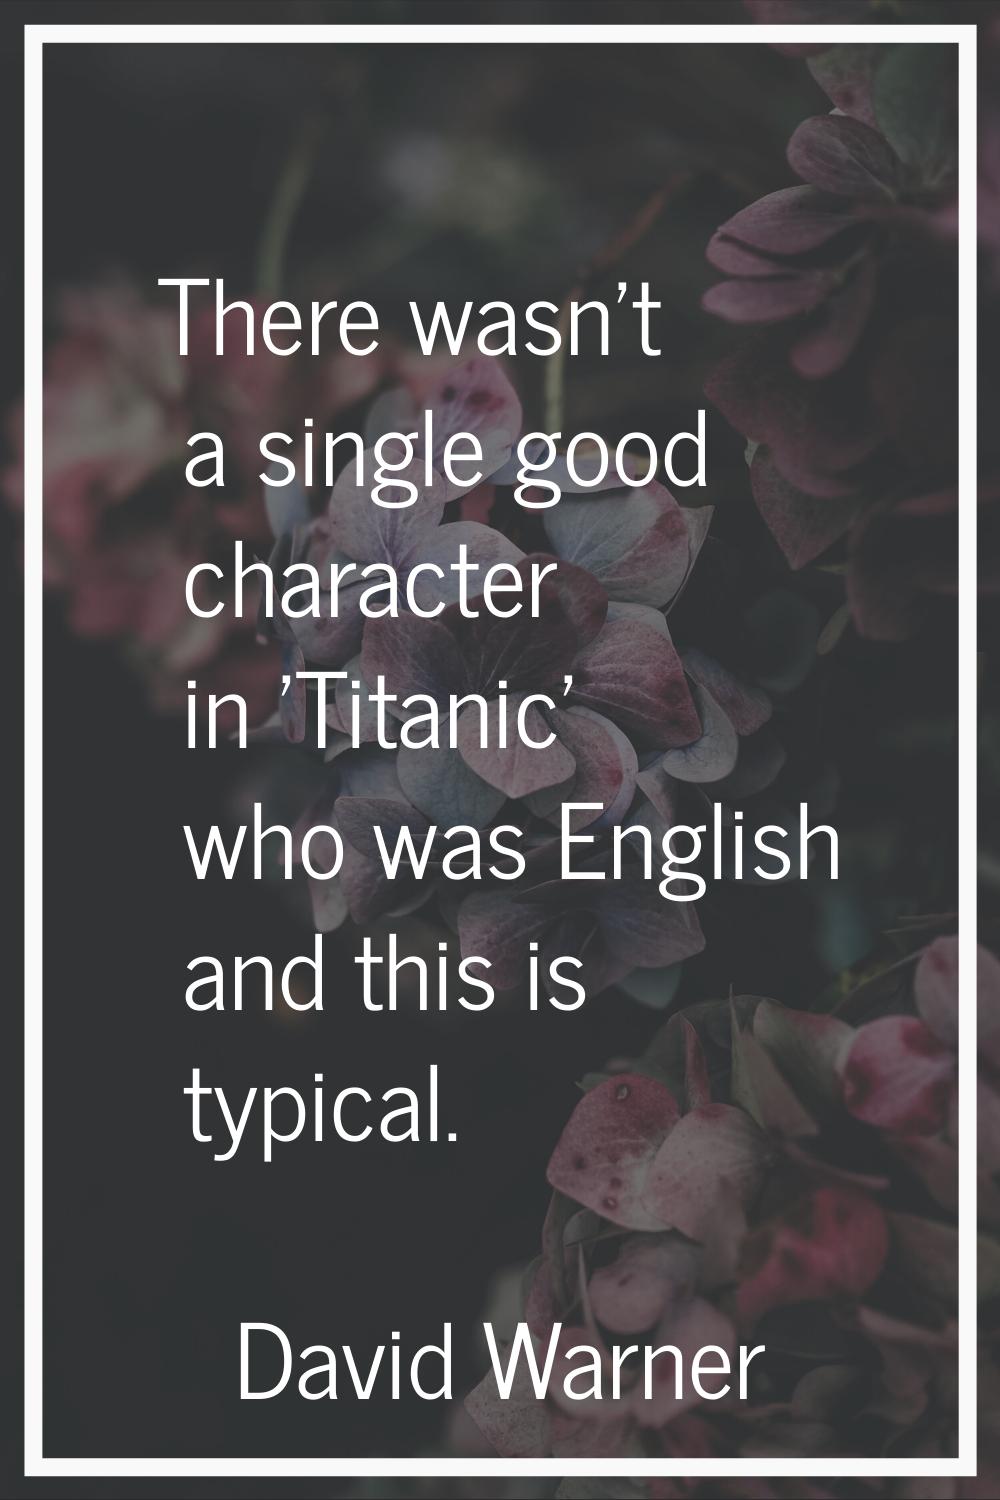 There wasn't a single good character in 'Titanic' who was English and this is typical.